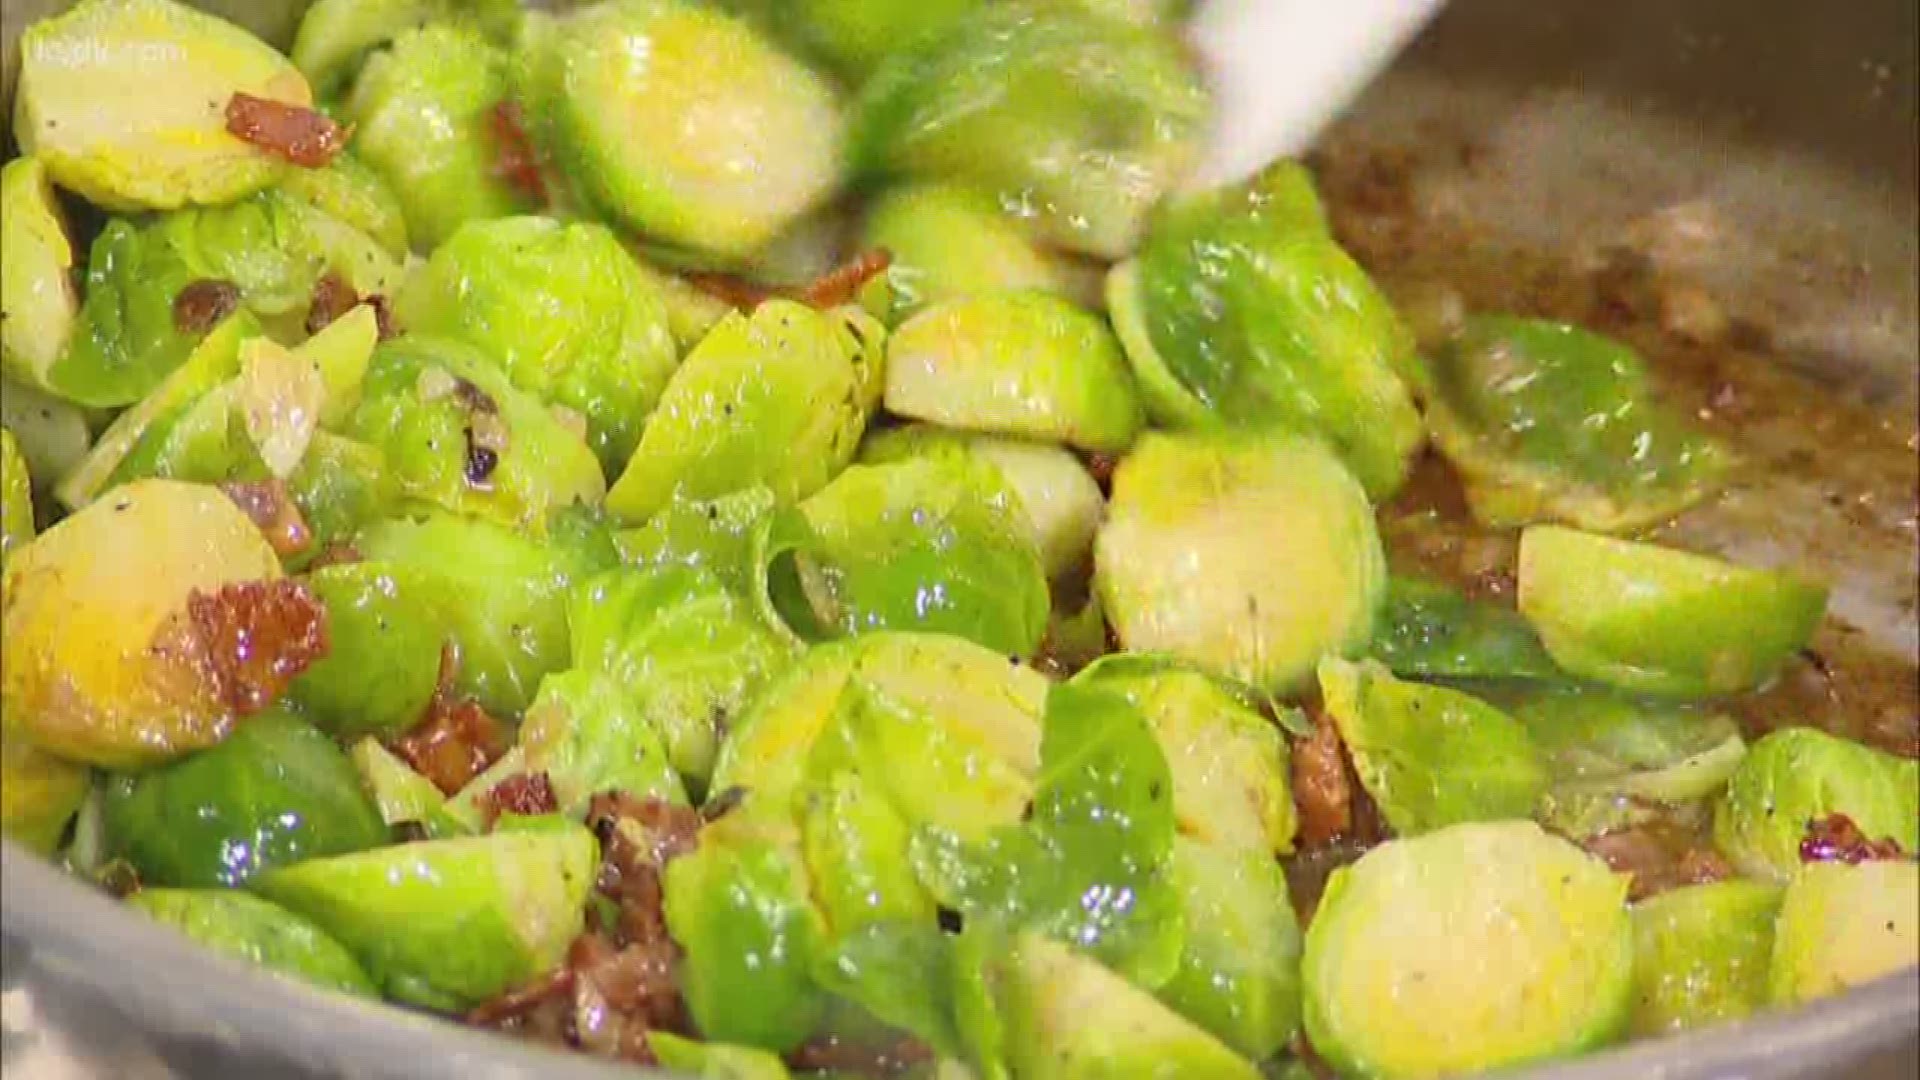 Anya Corson of Anya’s Apothekere shared a recipe for Fermented Garlic Honey Brussels Sprouts.